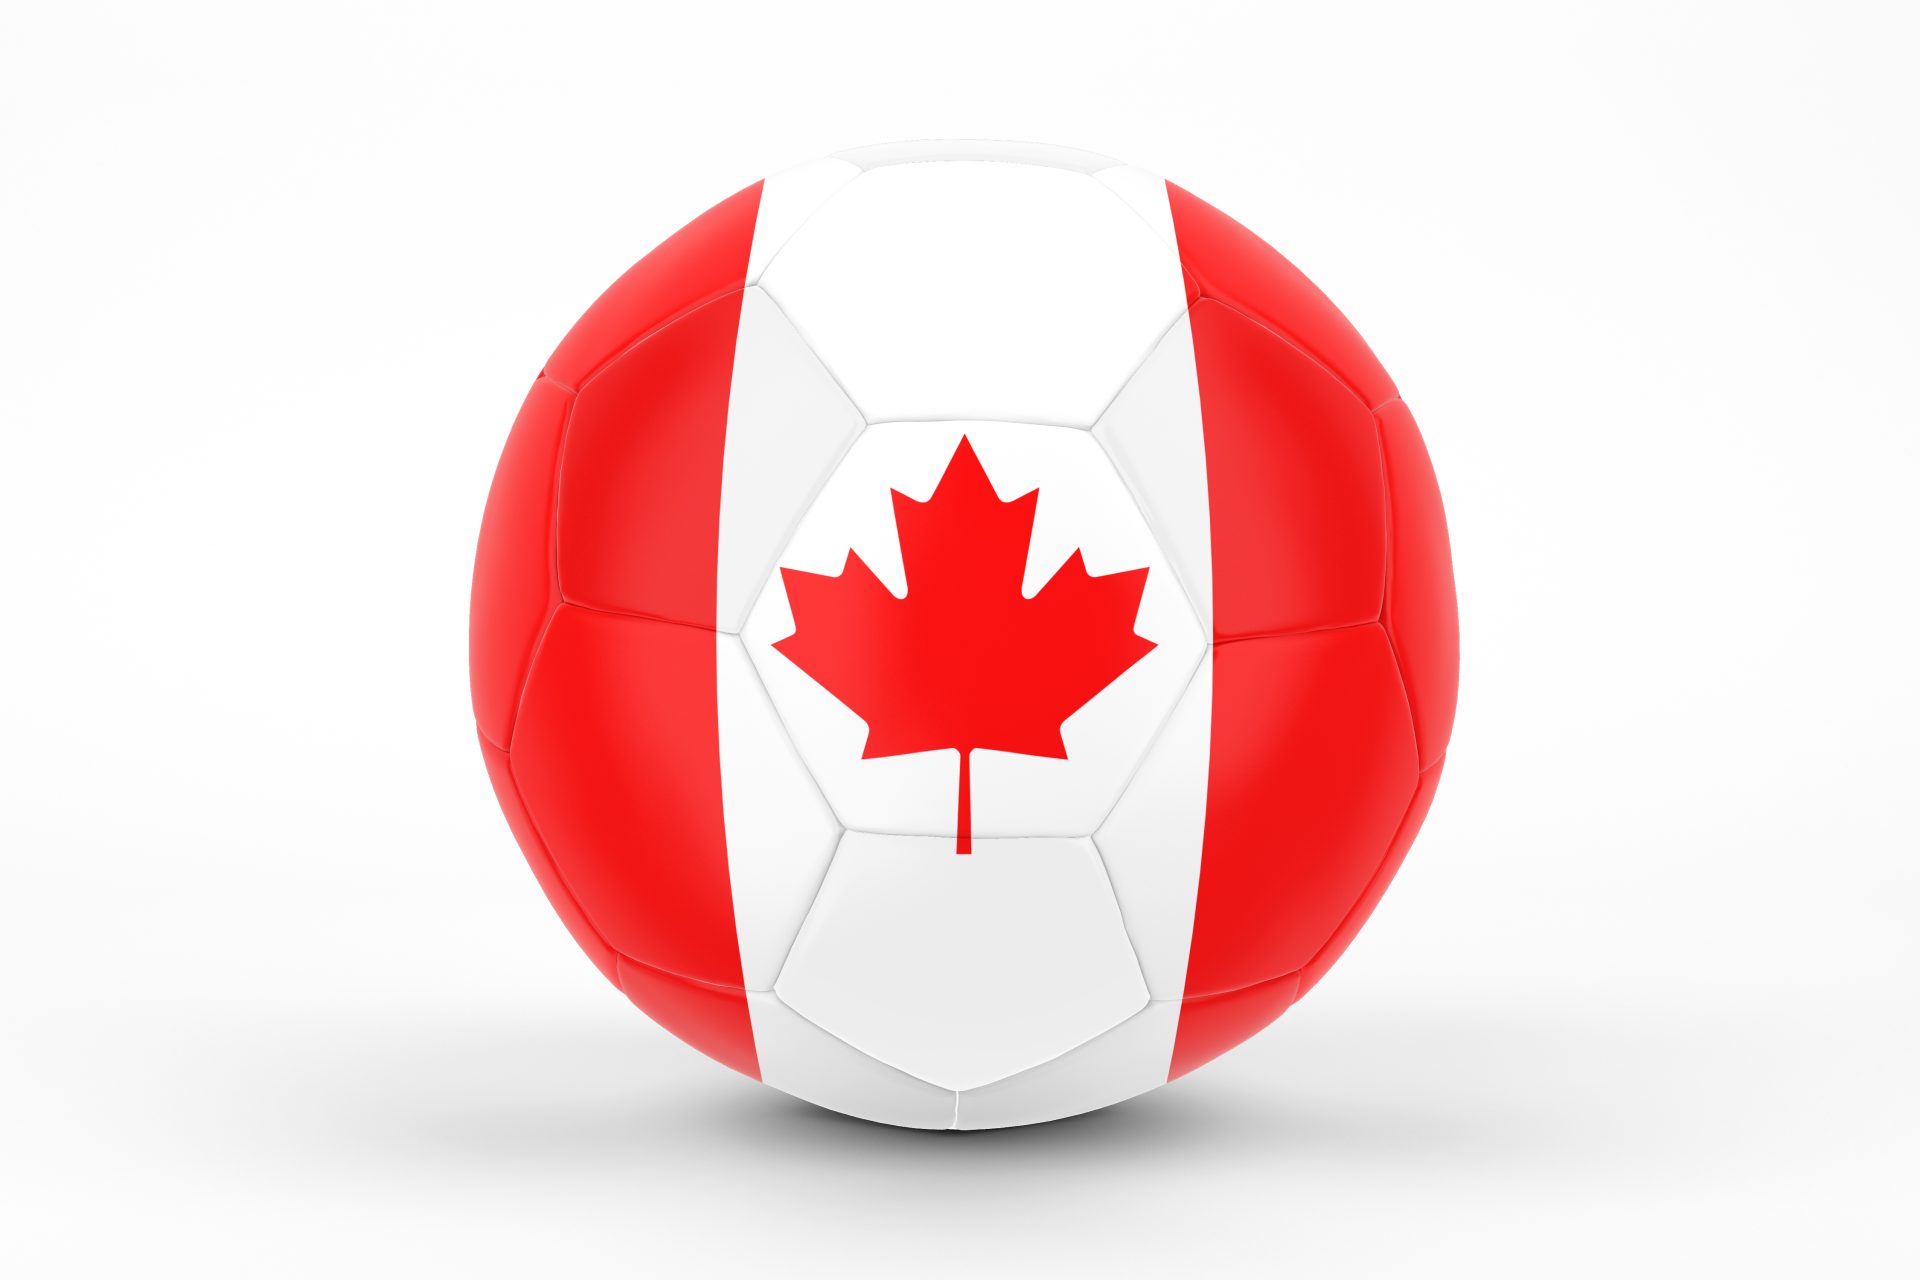 How Did Canada Perform at the FIFA World Cup?